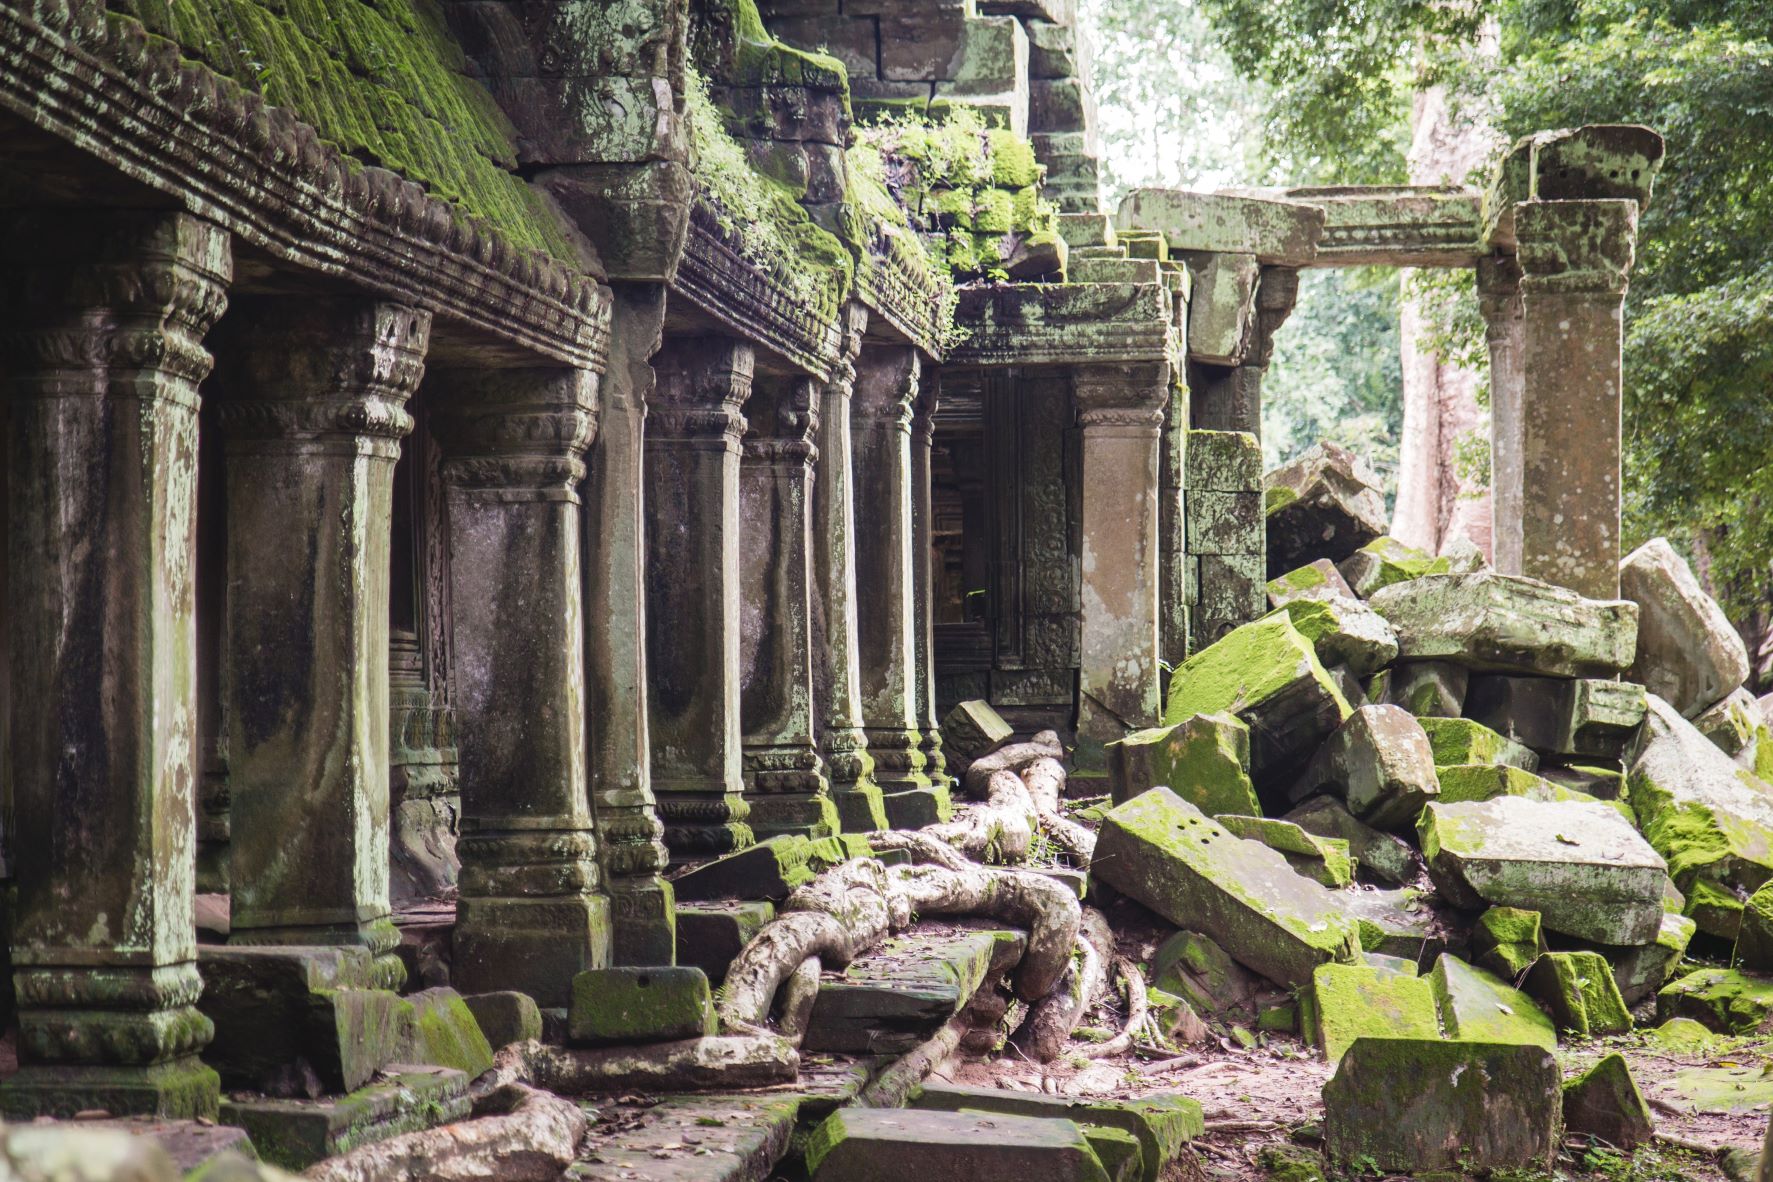 Cambodian Ruins - Photo by Raph Howald on Unsplash